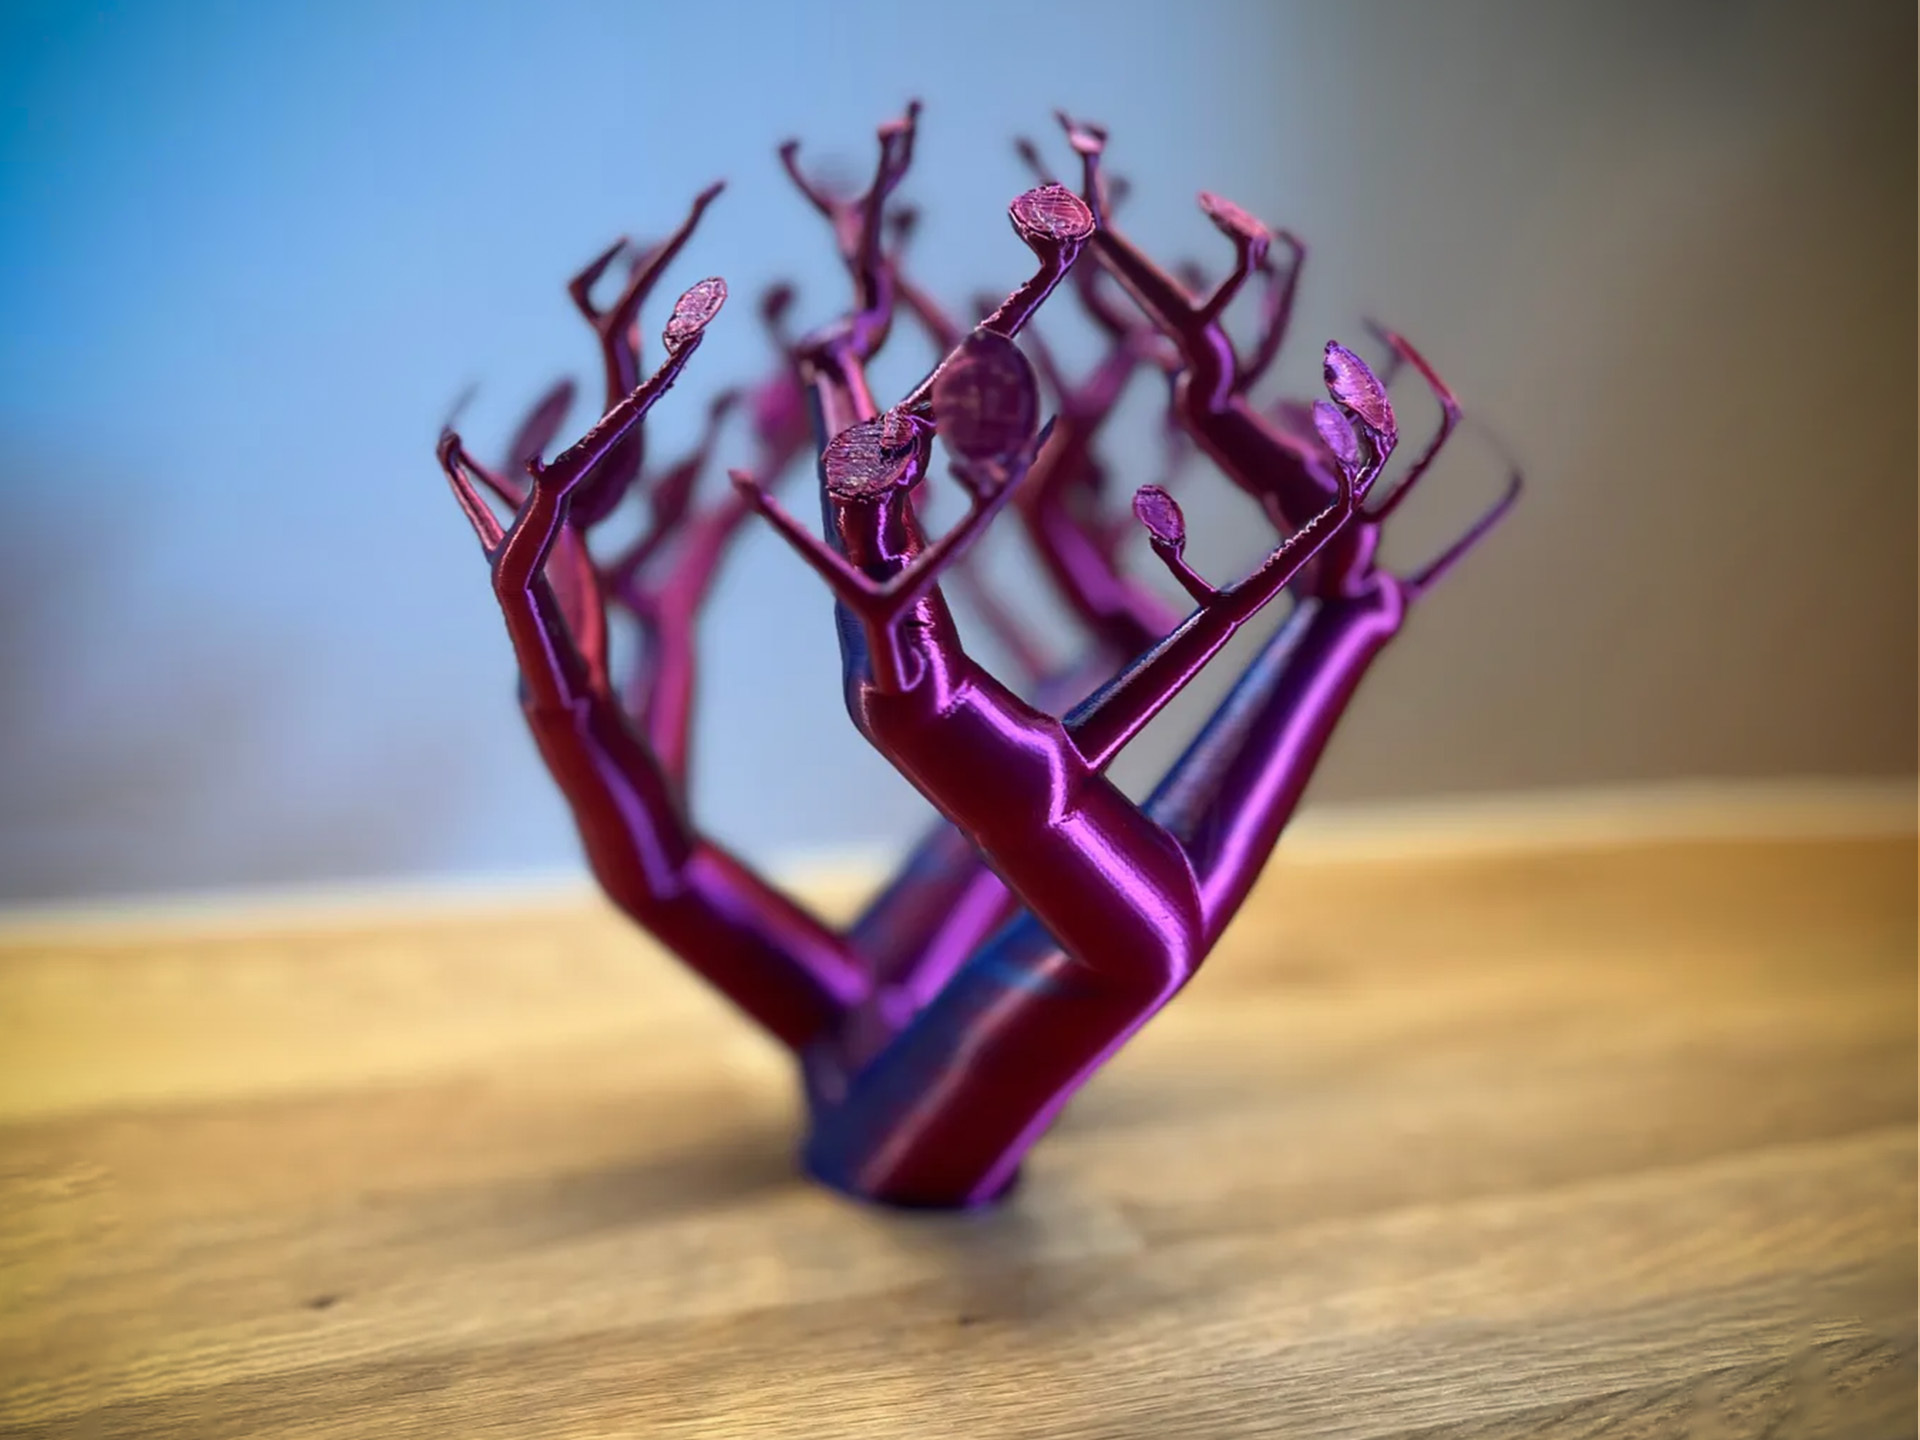 Organic Support Tree - model by Cqeye, photo and print by netsrot